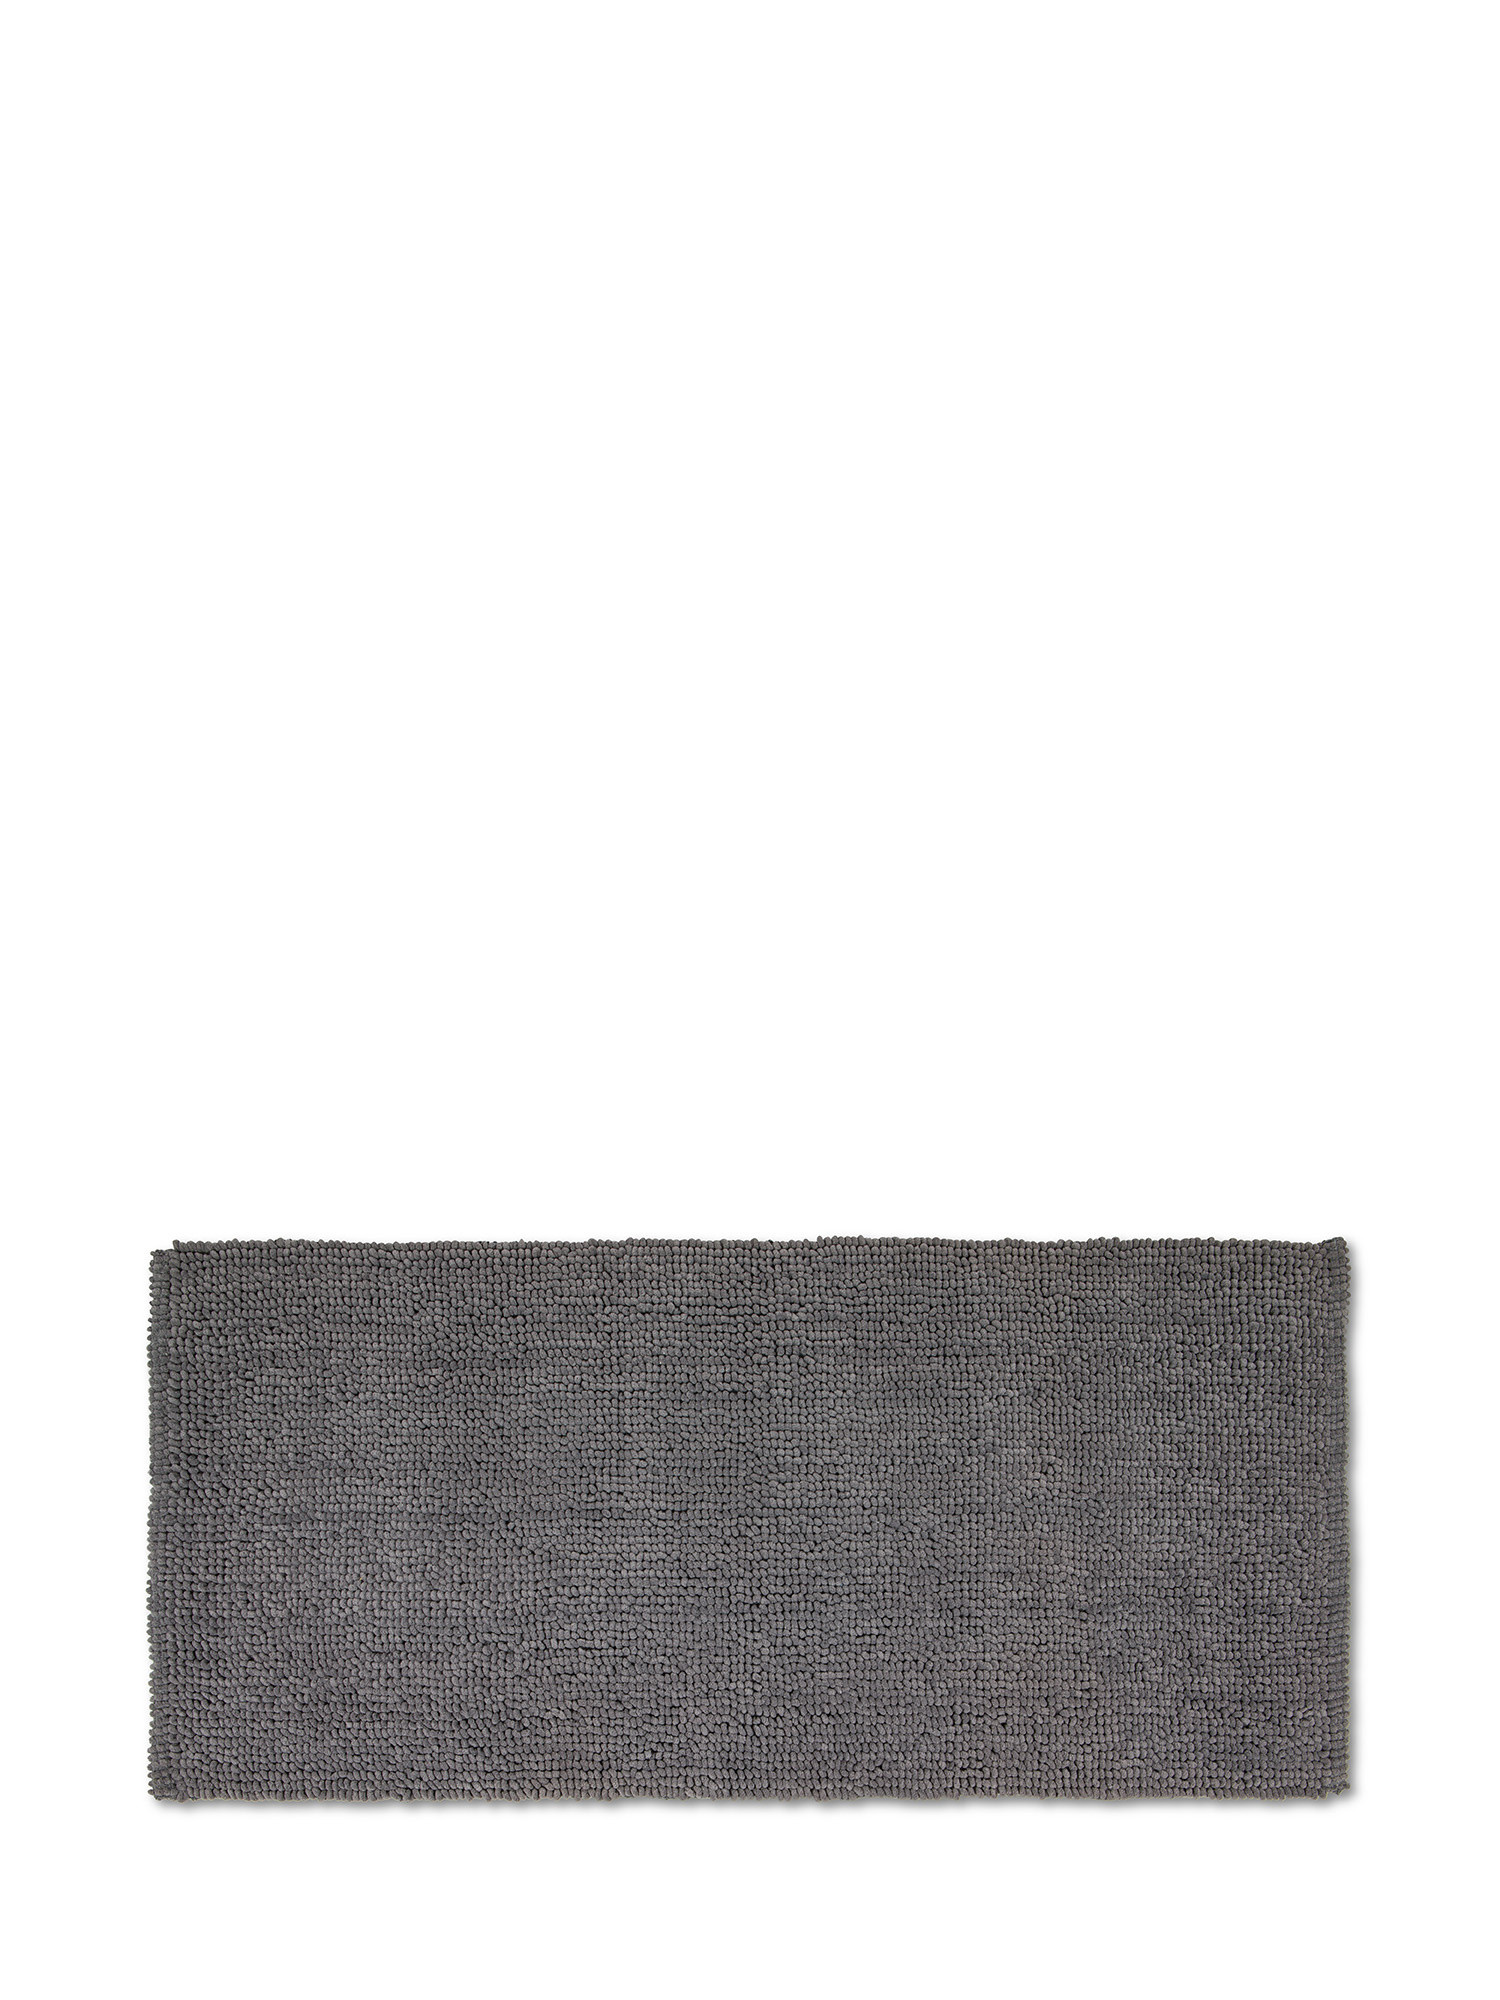 Long shaggy effect chenille bathroom rug, Grey, large image number 0